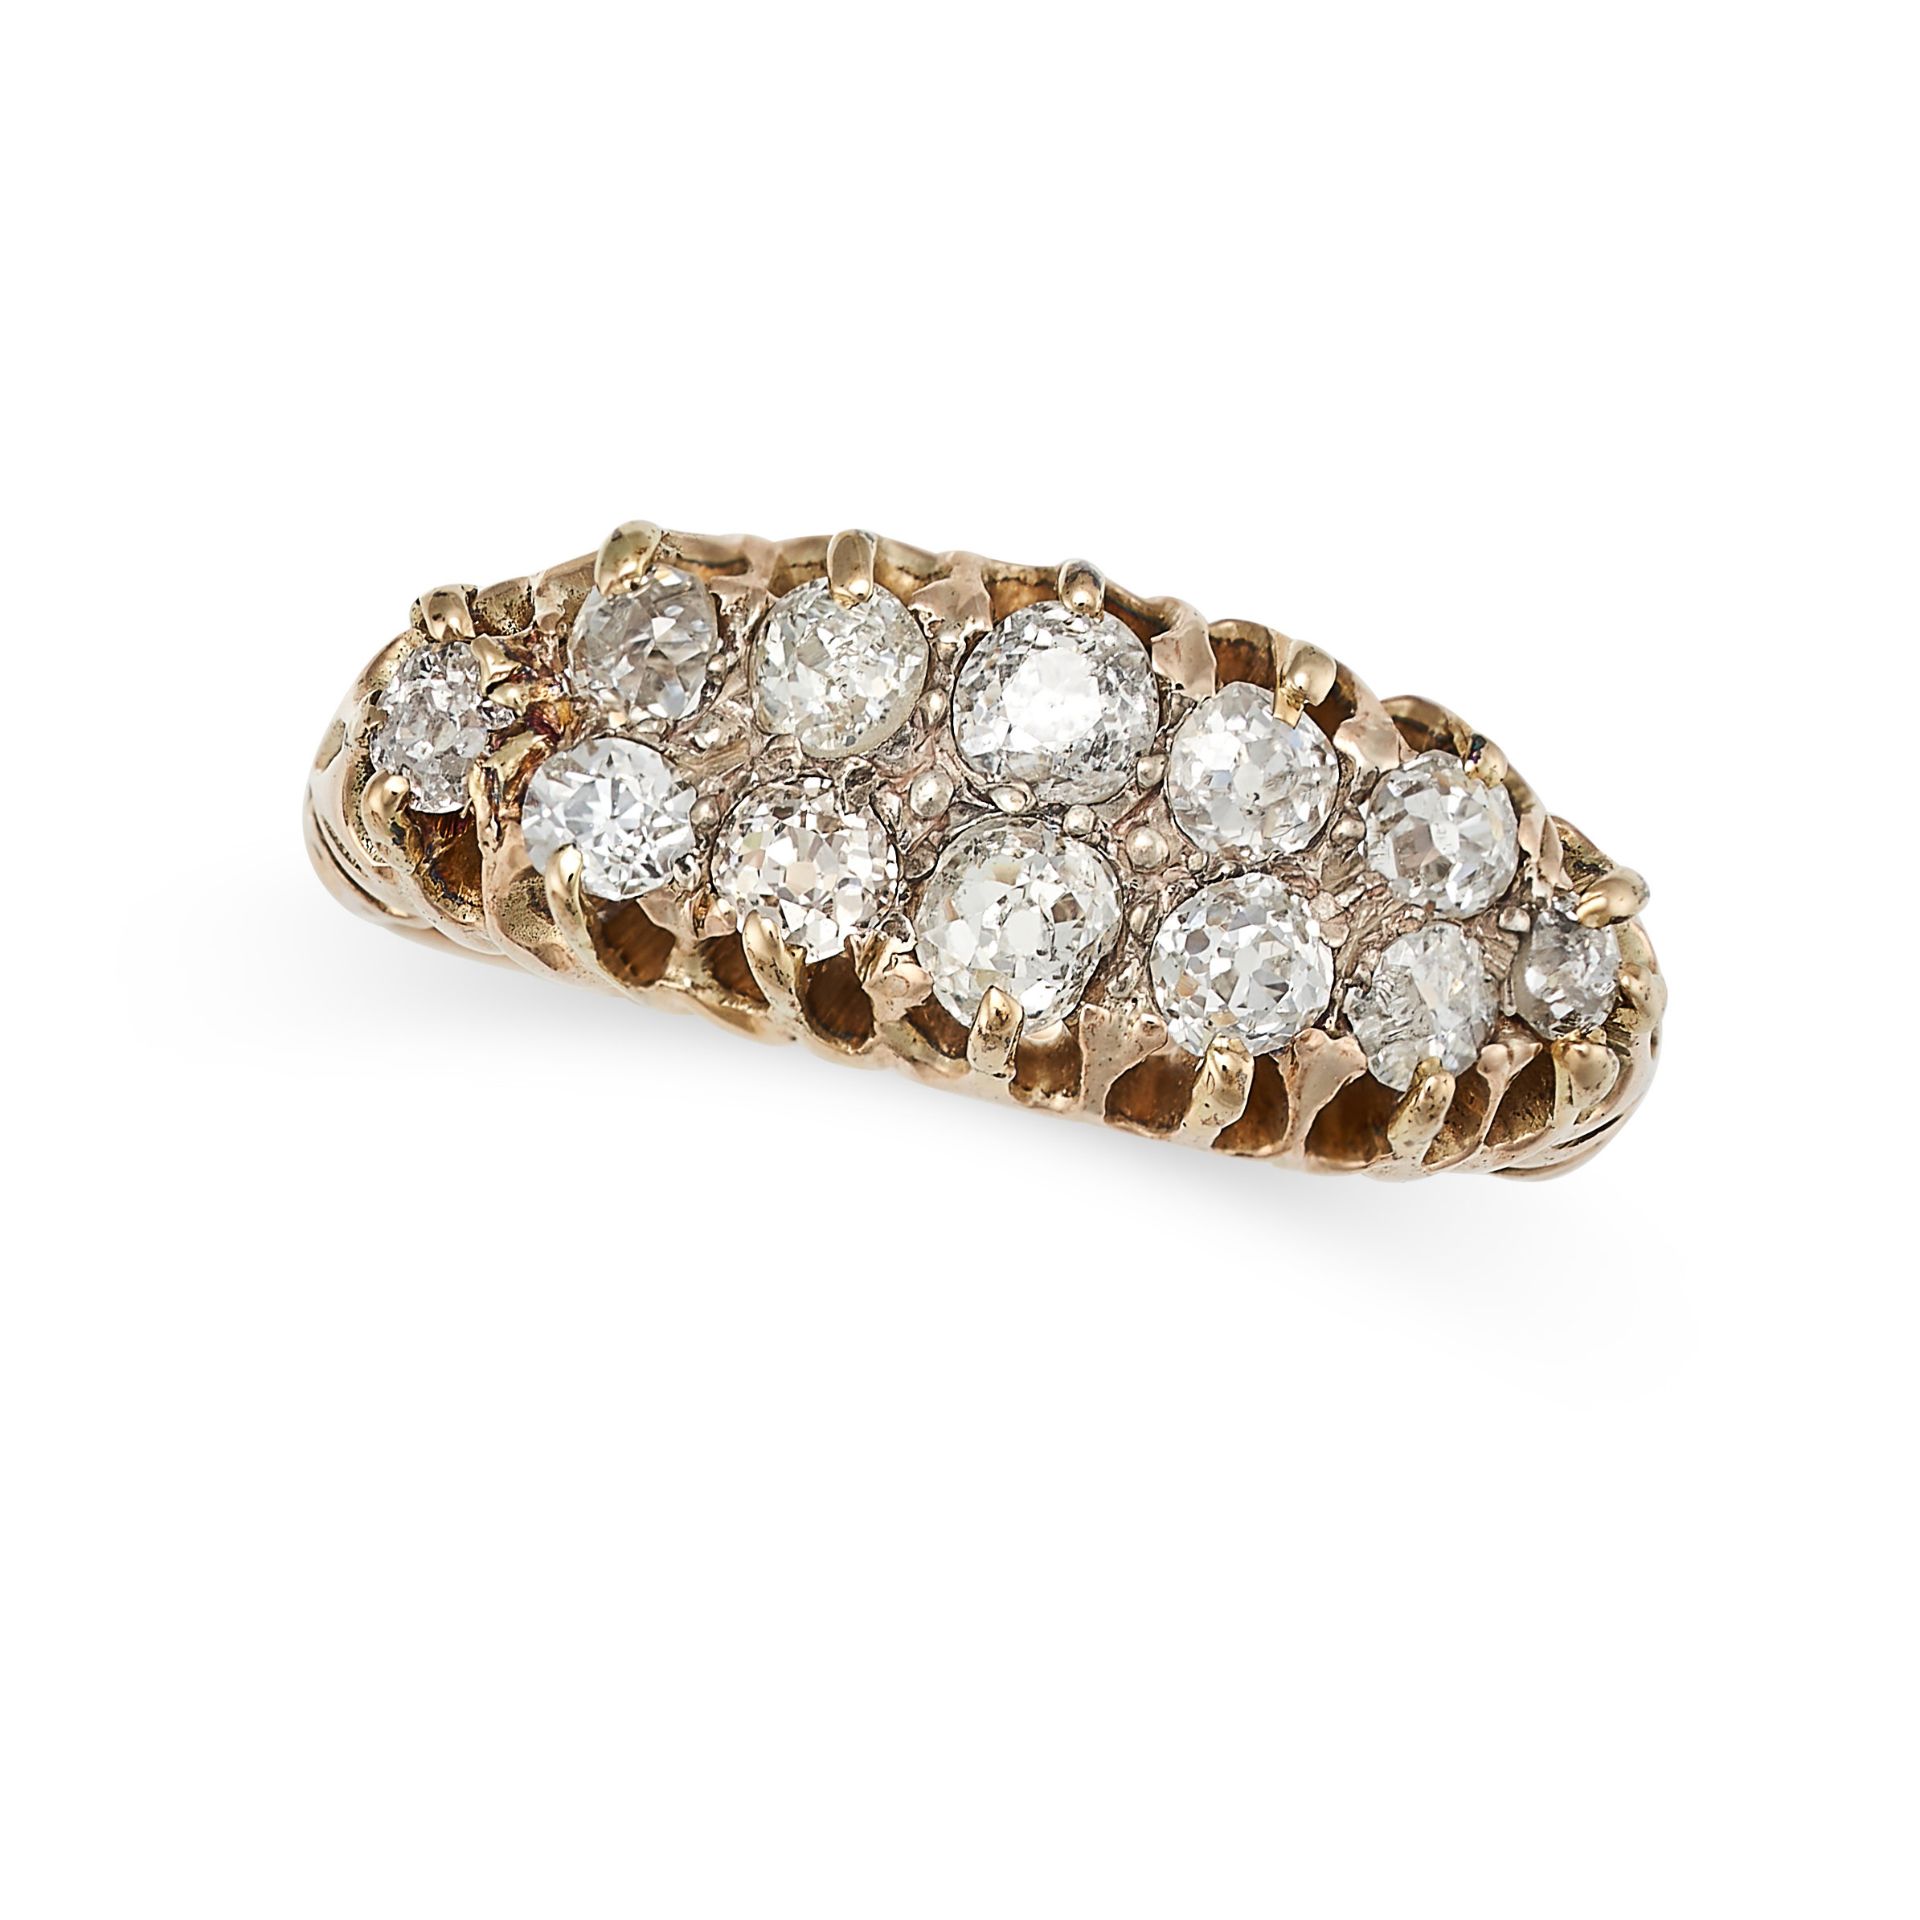 AN ANTIQUE VICTORIAN DIAMOND RING, 19TH CENTURY in yellow gold, set with two rows of old cut diam...